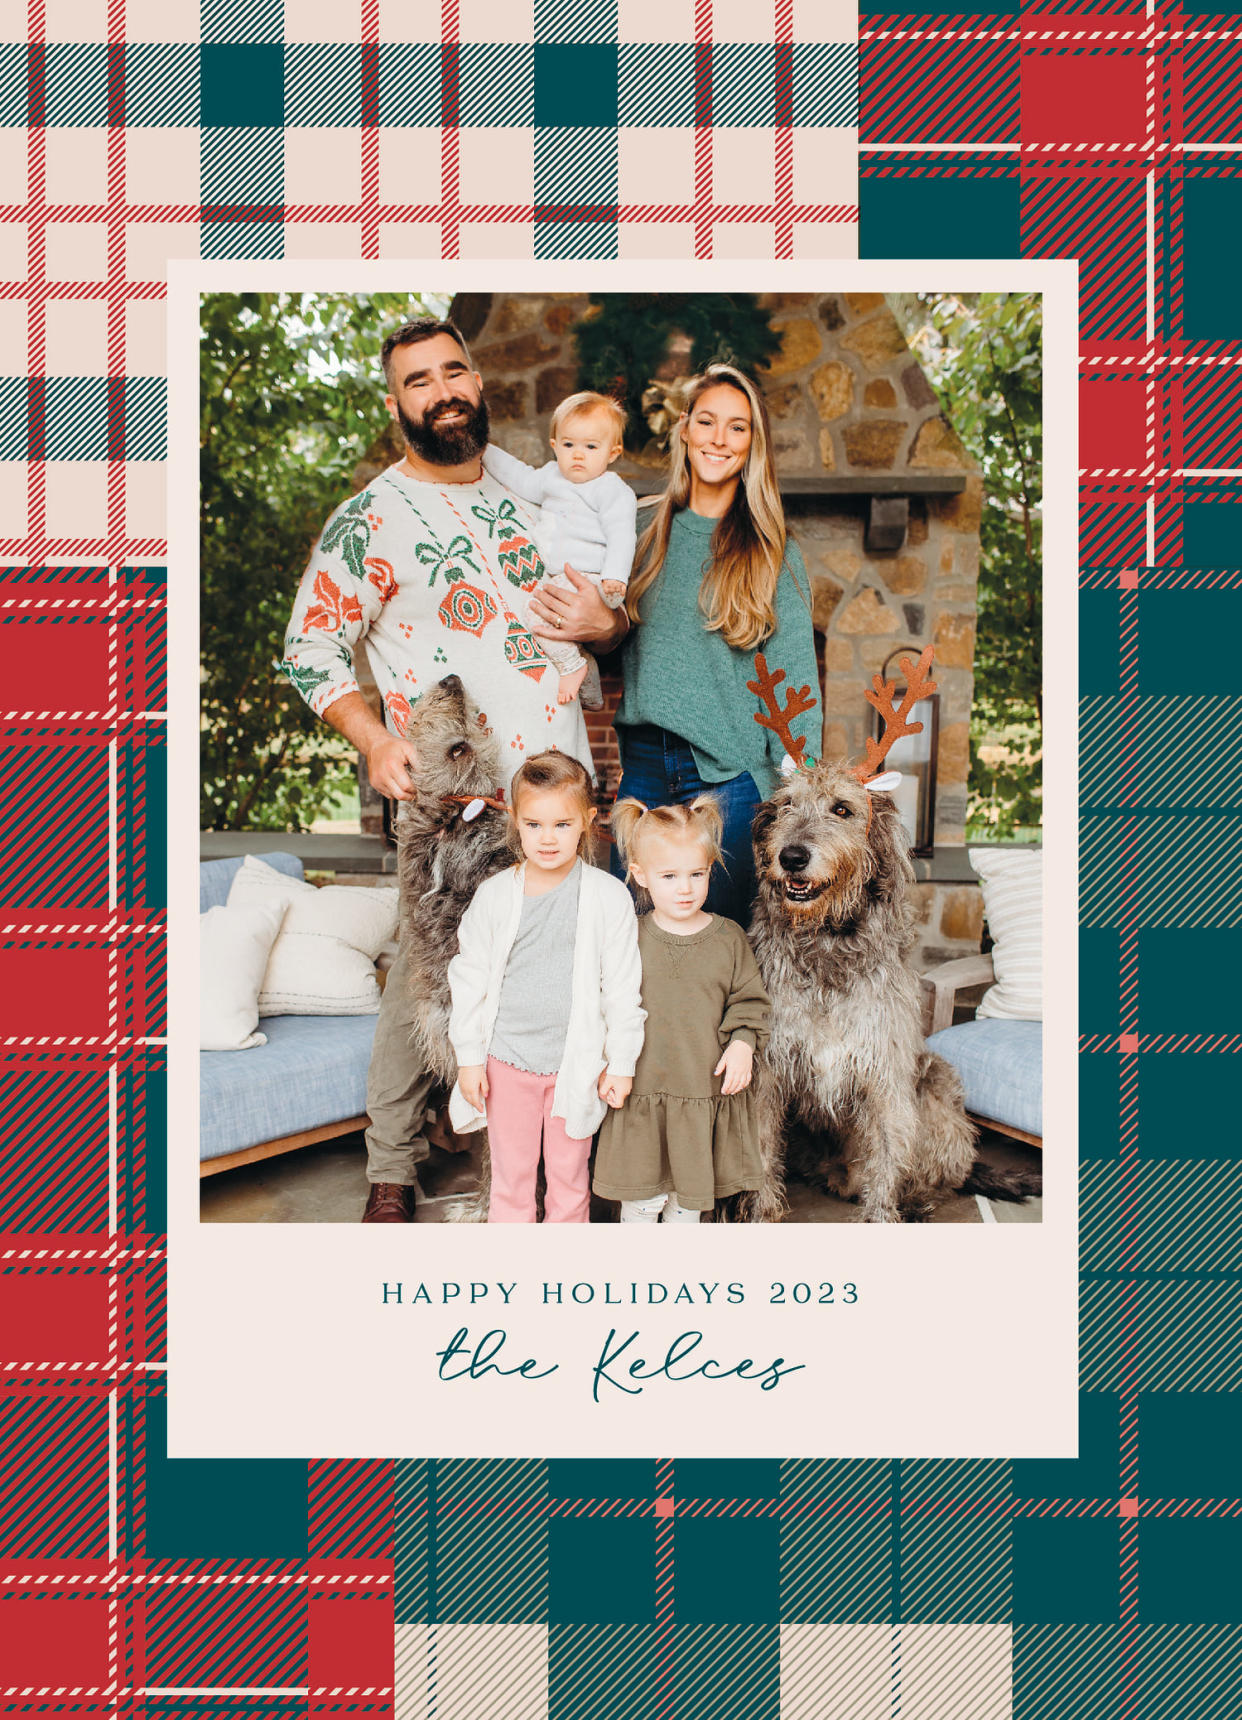 Happy holidays from the Kelces! (Minted / Megan Cash)